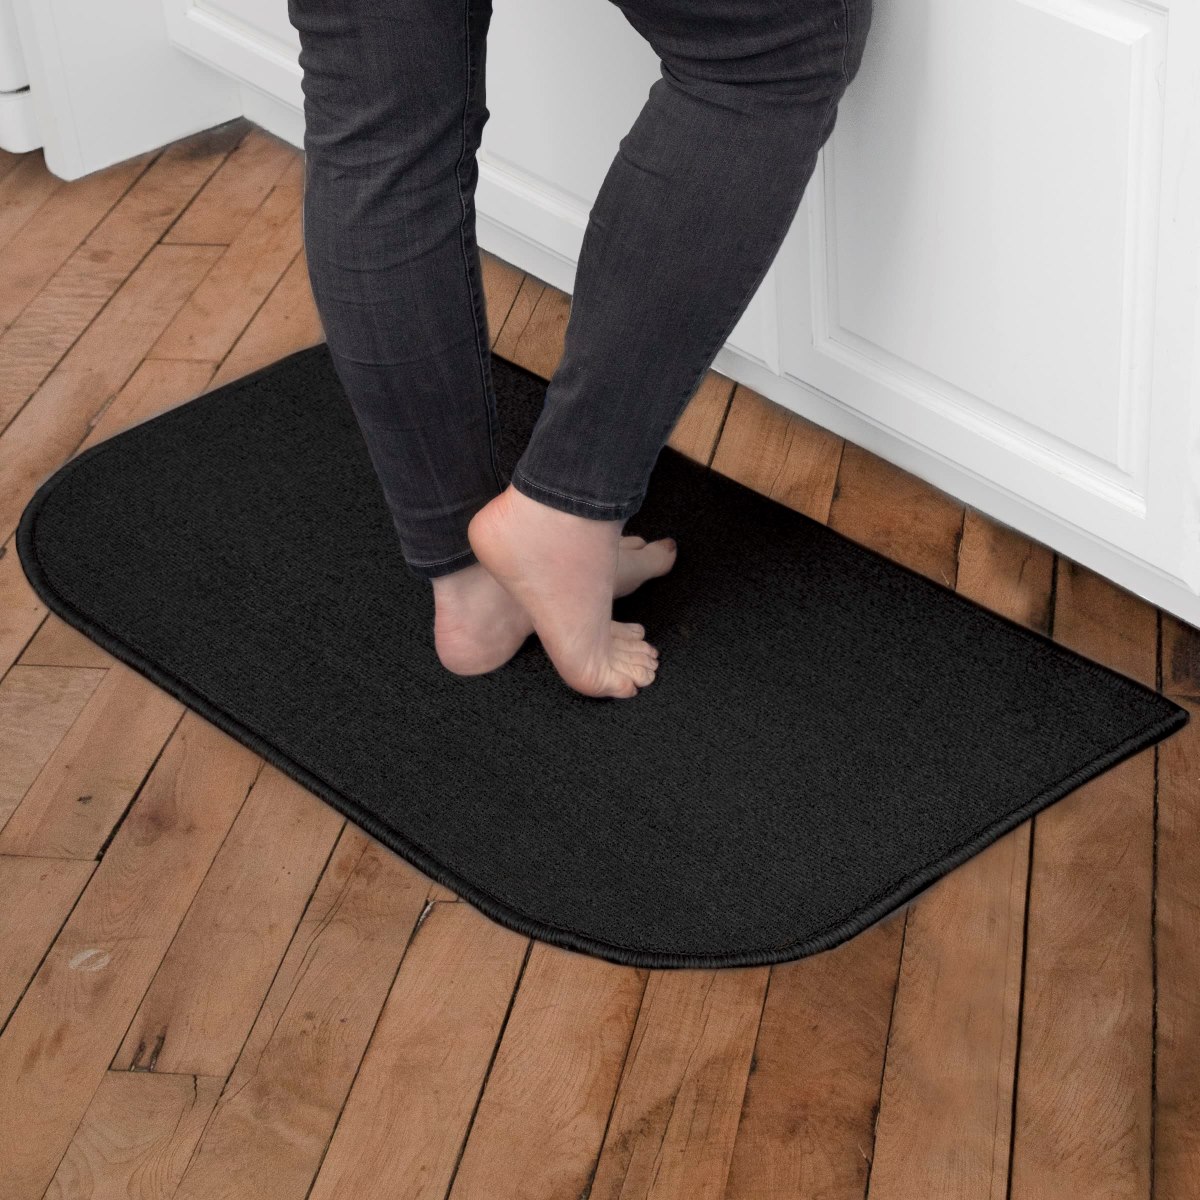 What Is Latex Backing On Rugs